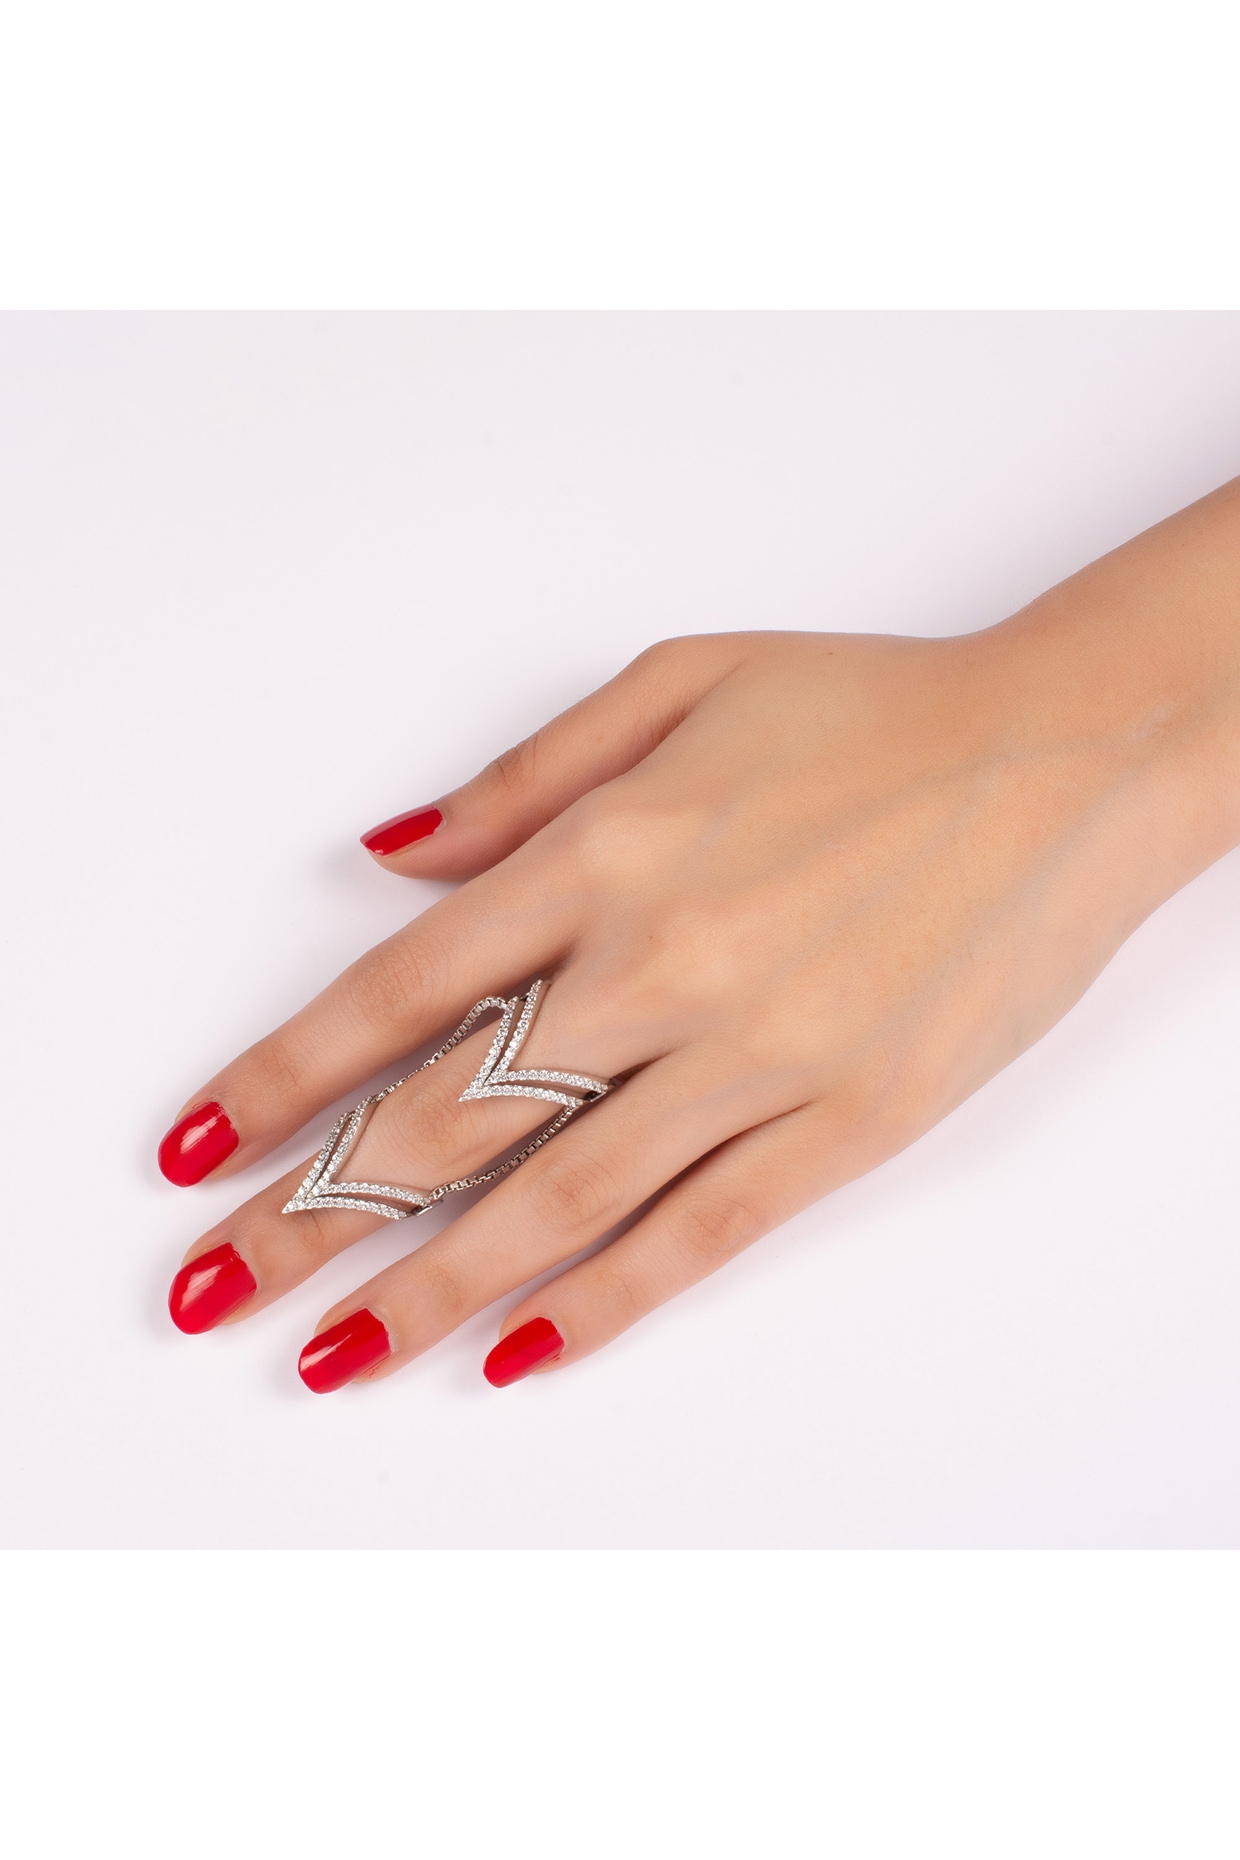 Party Wear Ring - Buy Foliage Leaf Rings At Online - Solasta Jewelry